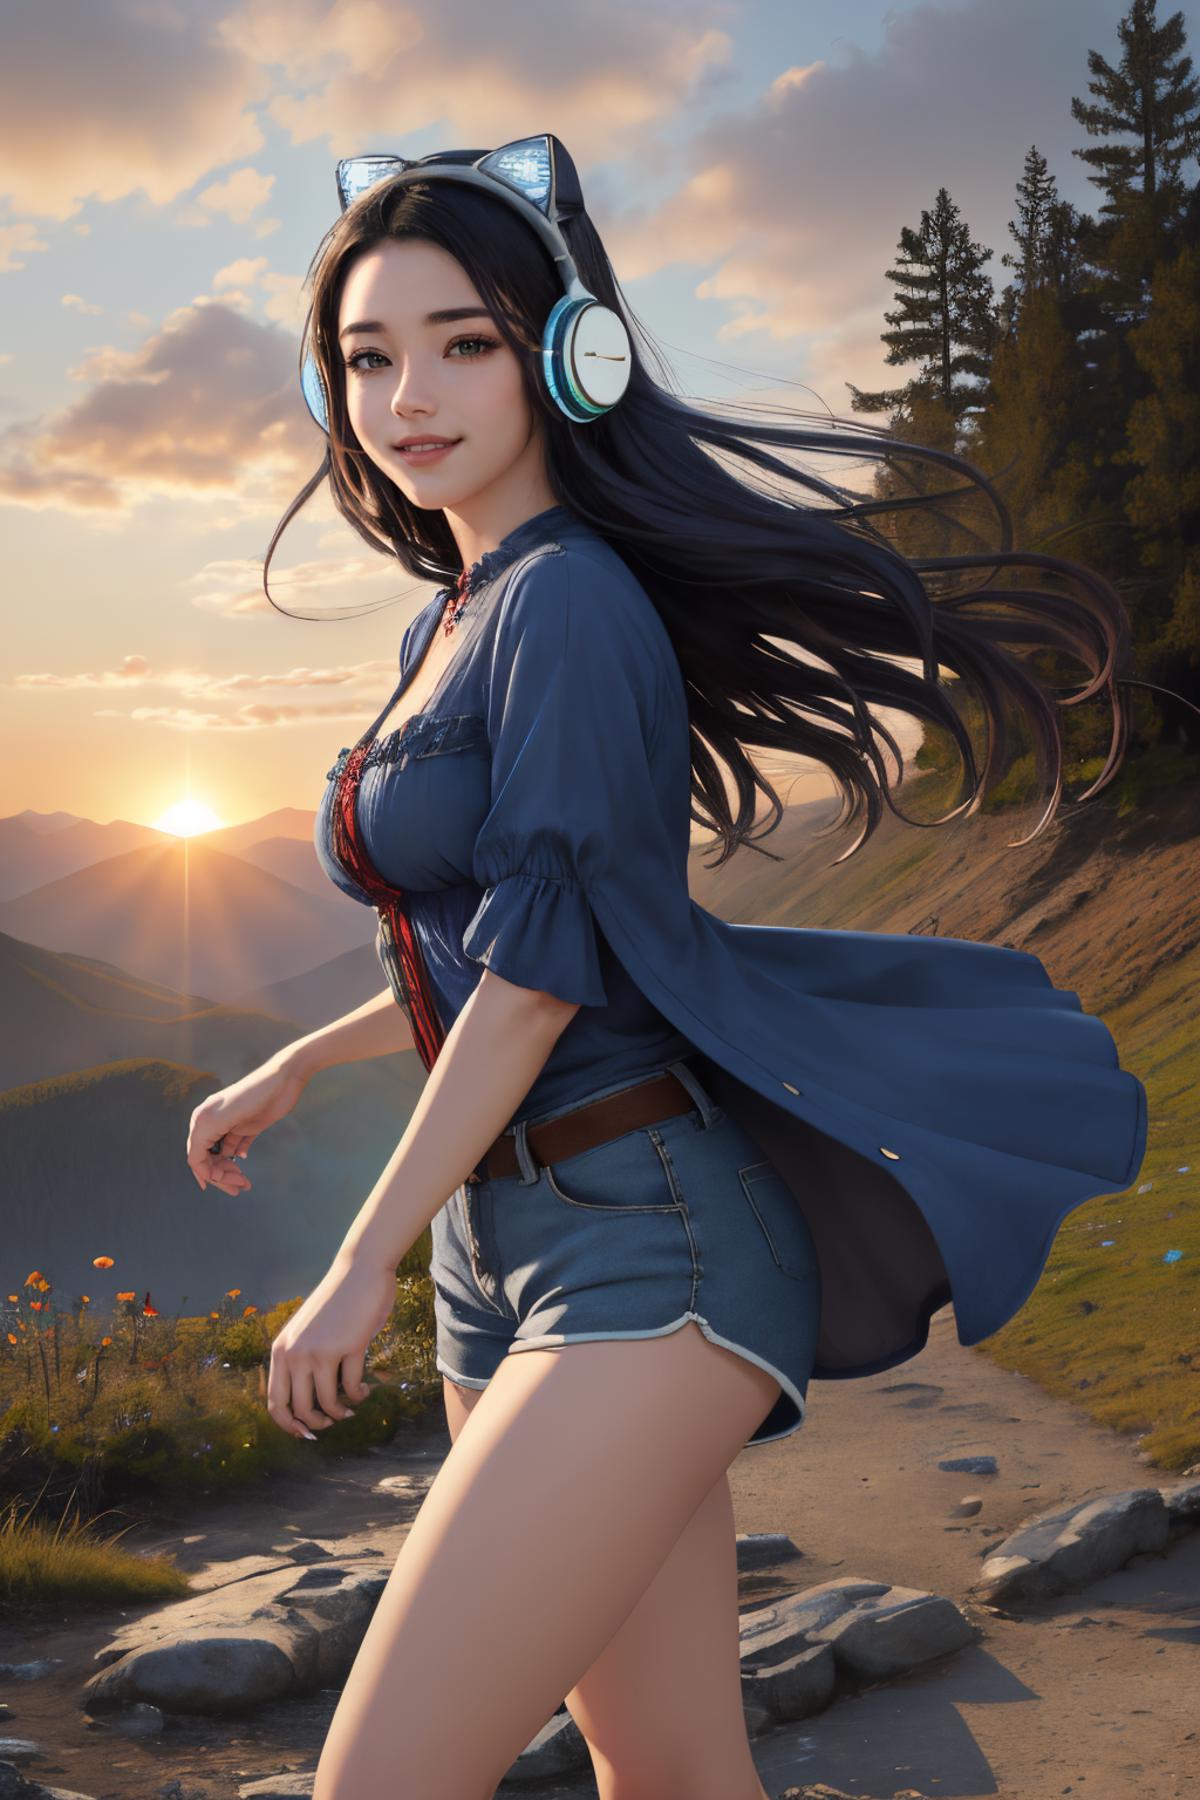 Cat Ear Headphones | Clothing/Concept LoRA image by Darknoice